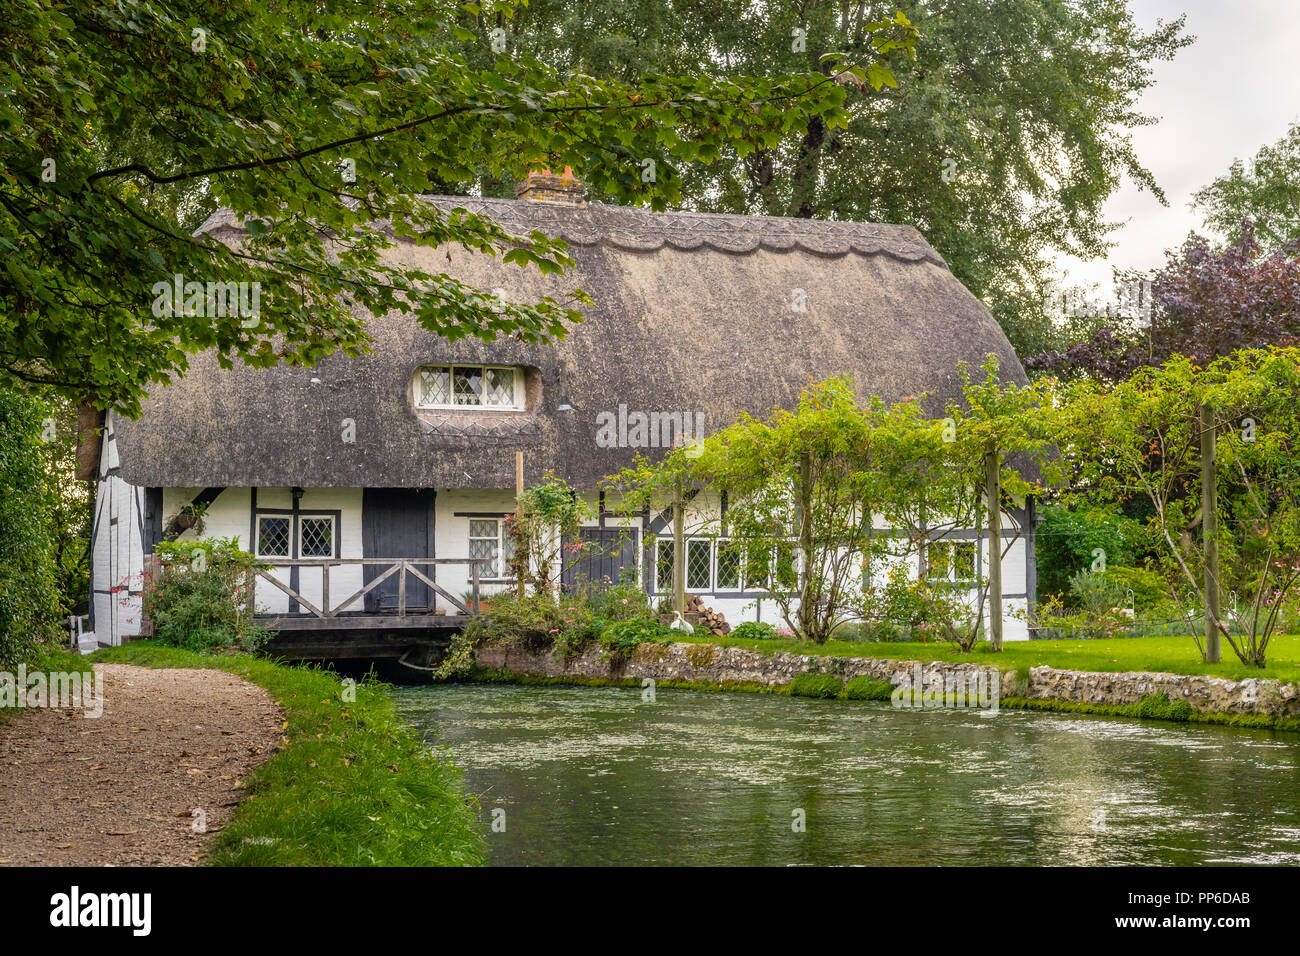 The Fulling Mill,a traditional thatched roof cottage, along the River Alre in New Alresford during summer 2018, Hampshire, England, UK Stock Photo